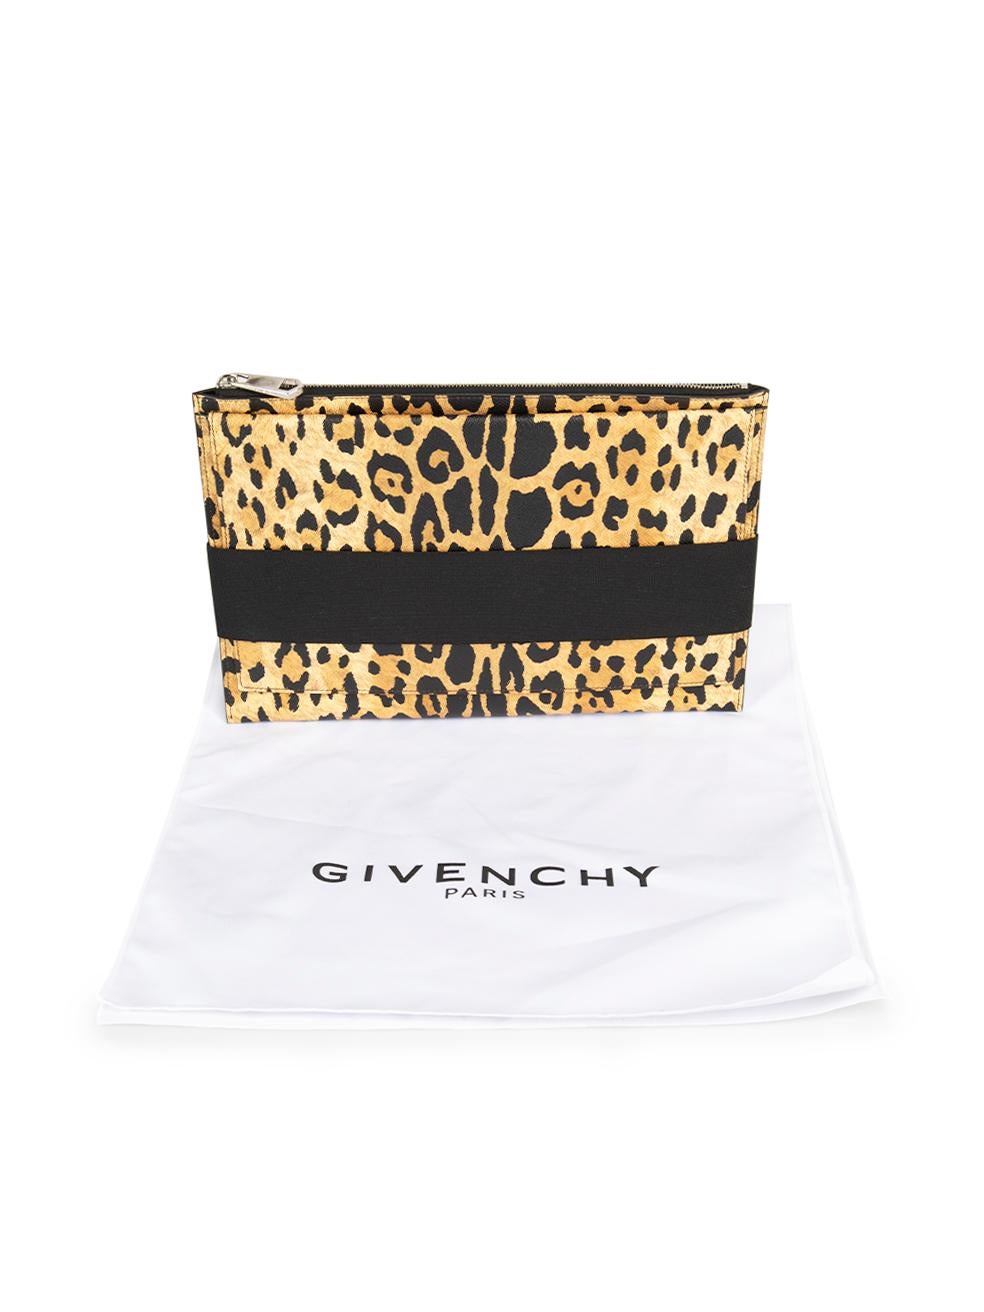 Givenchy Brown Leopard Print Leather Clutch For Sale 2